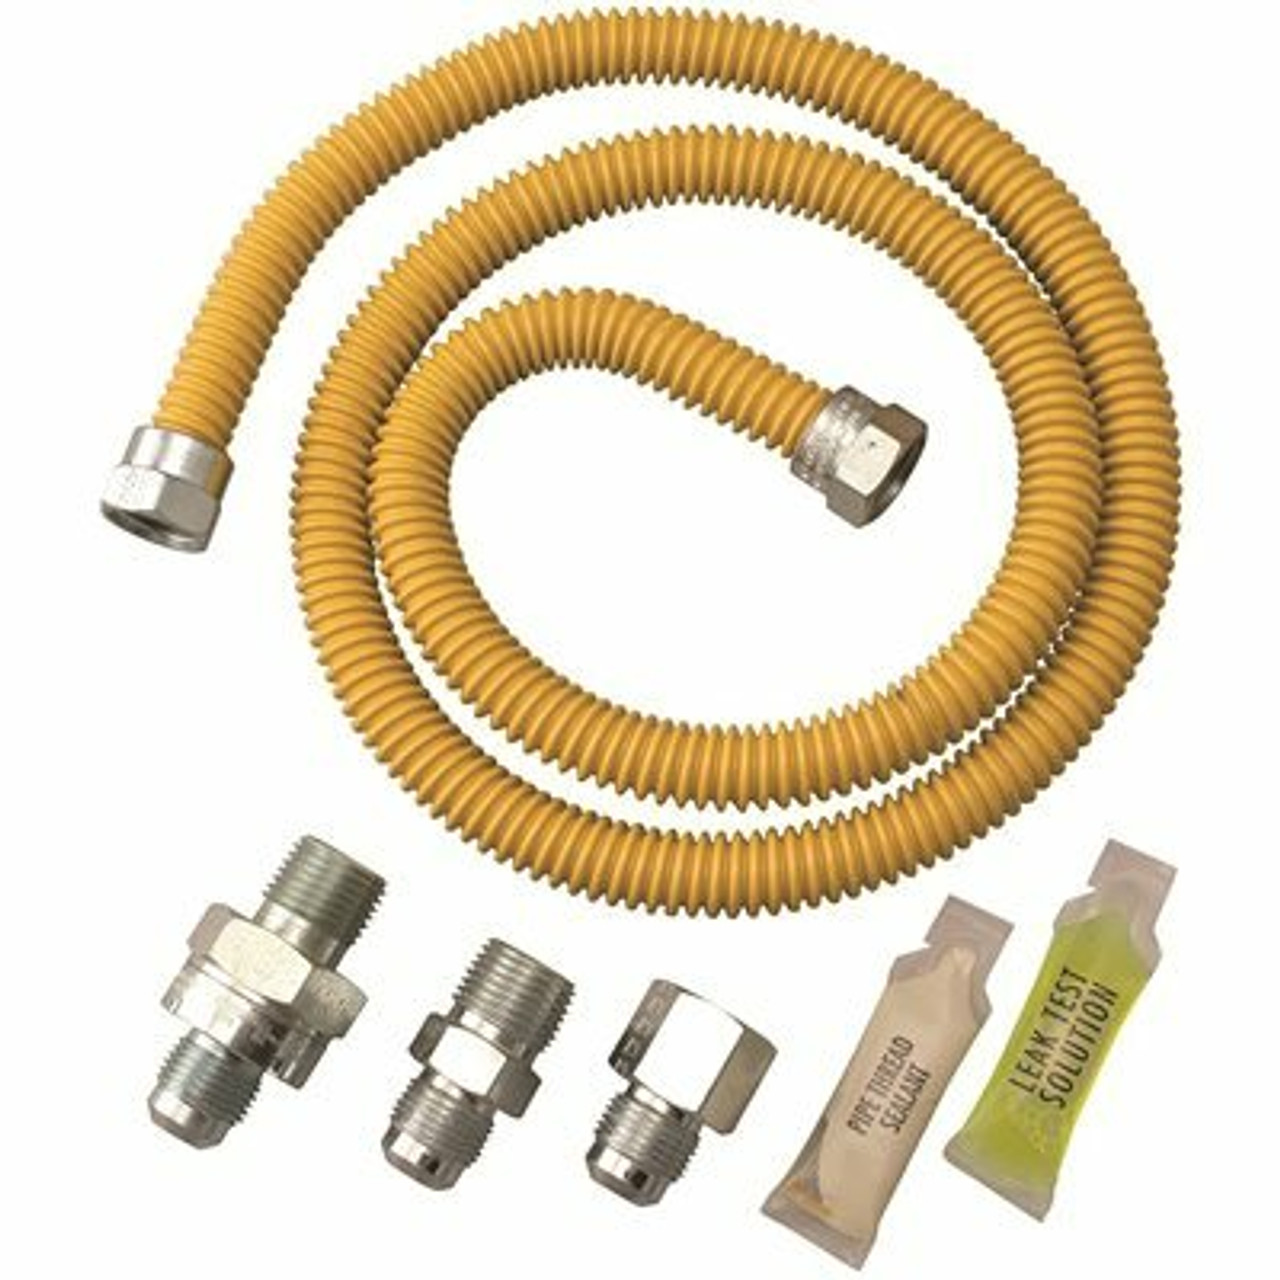 Watts 1/2 In. Fip X 1/2 In. Mip X 48 In. Gas Water Heater And Dryer Connector 1/2 In. Od 3/8 In. Id